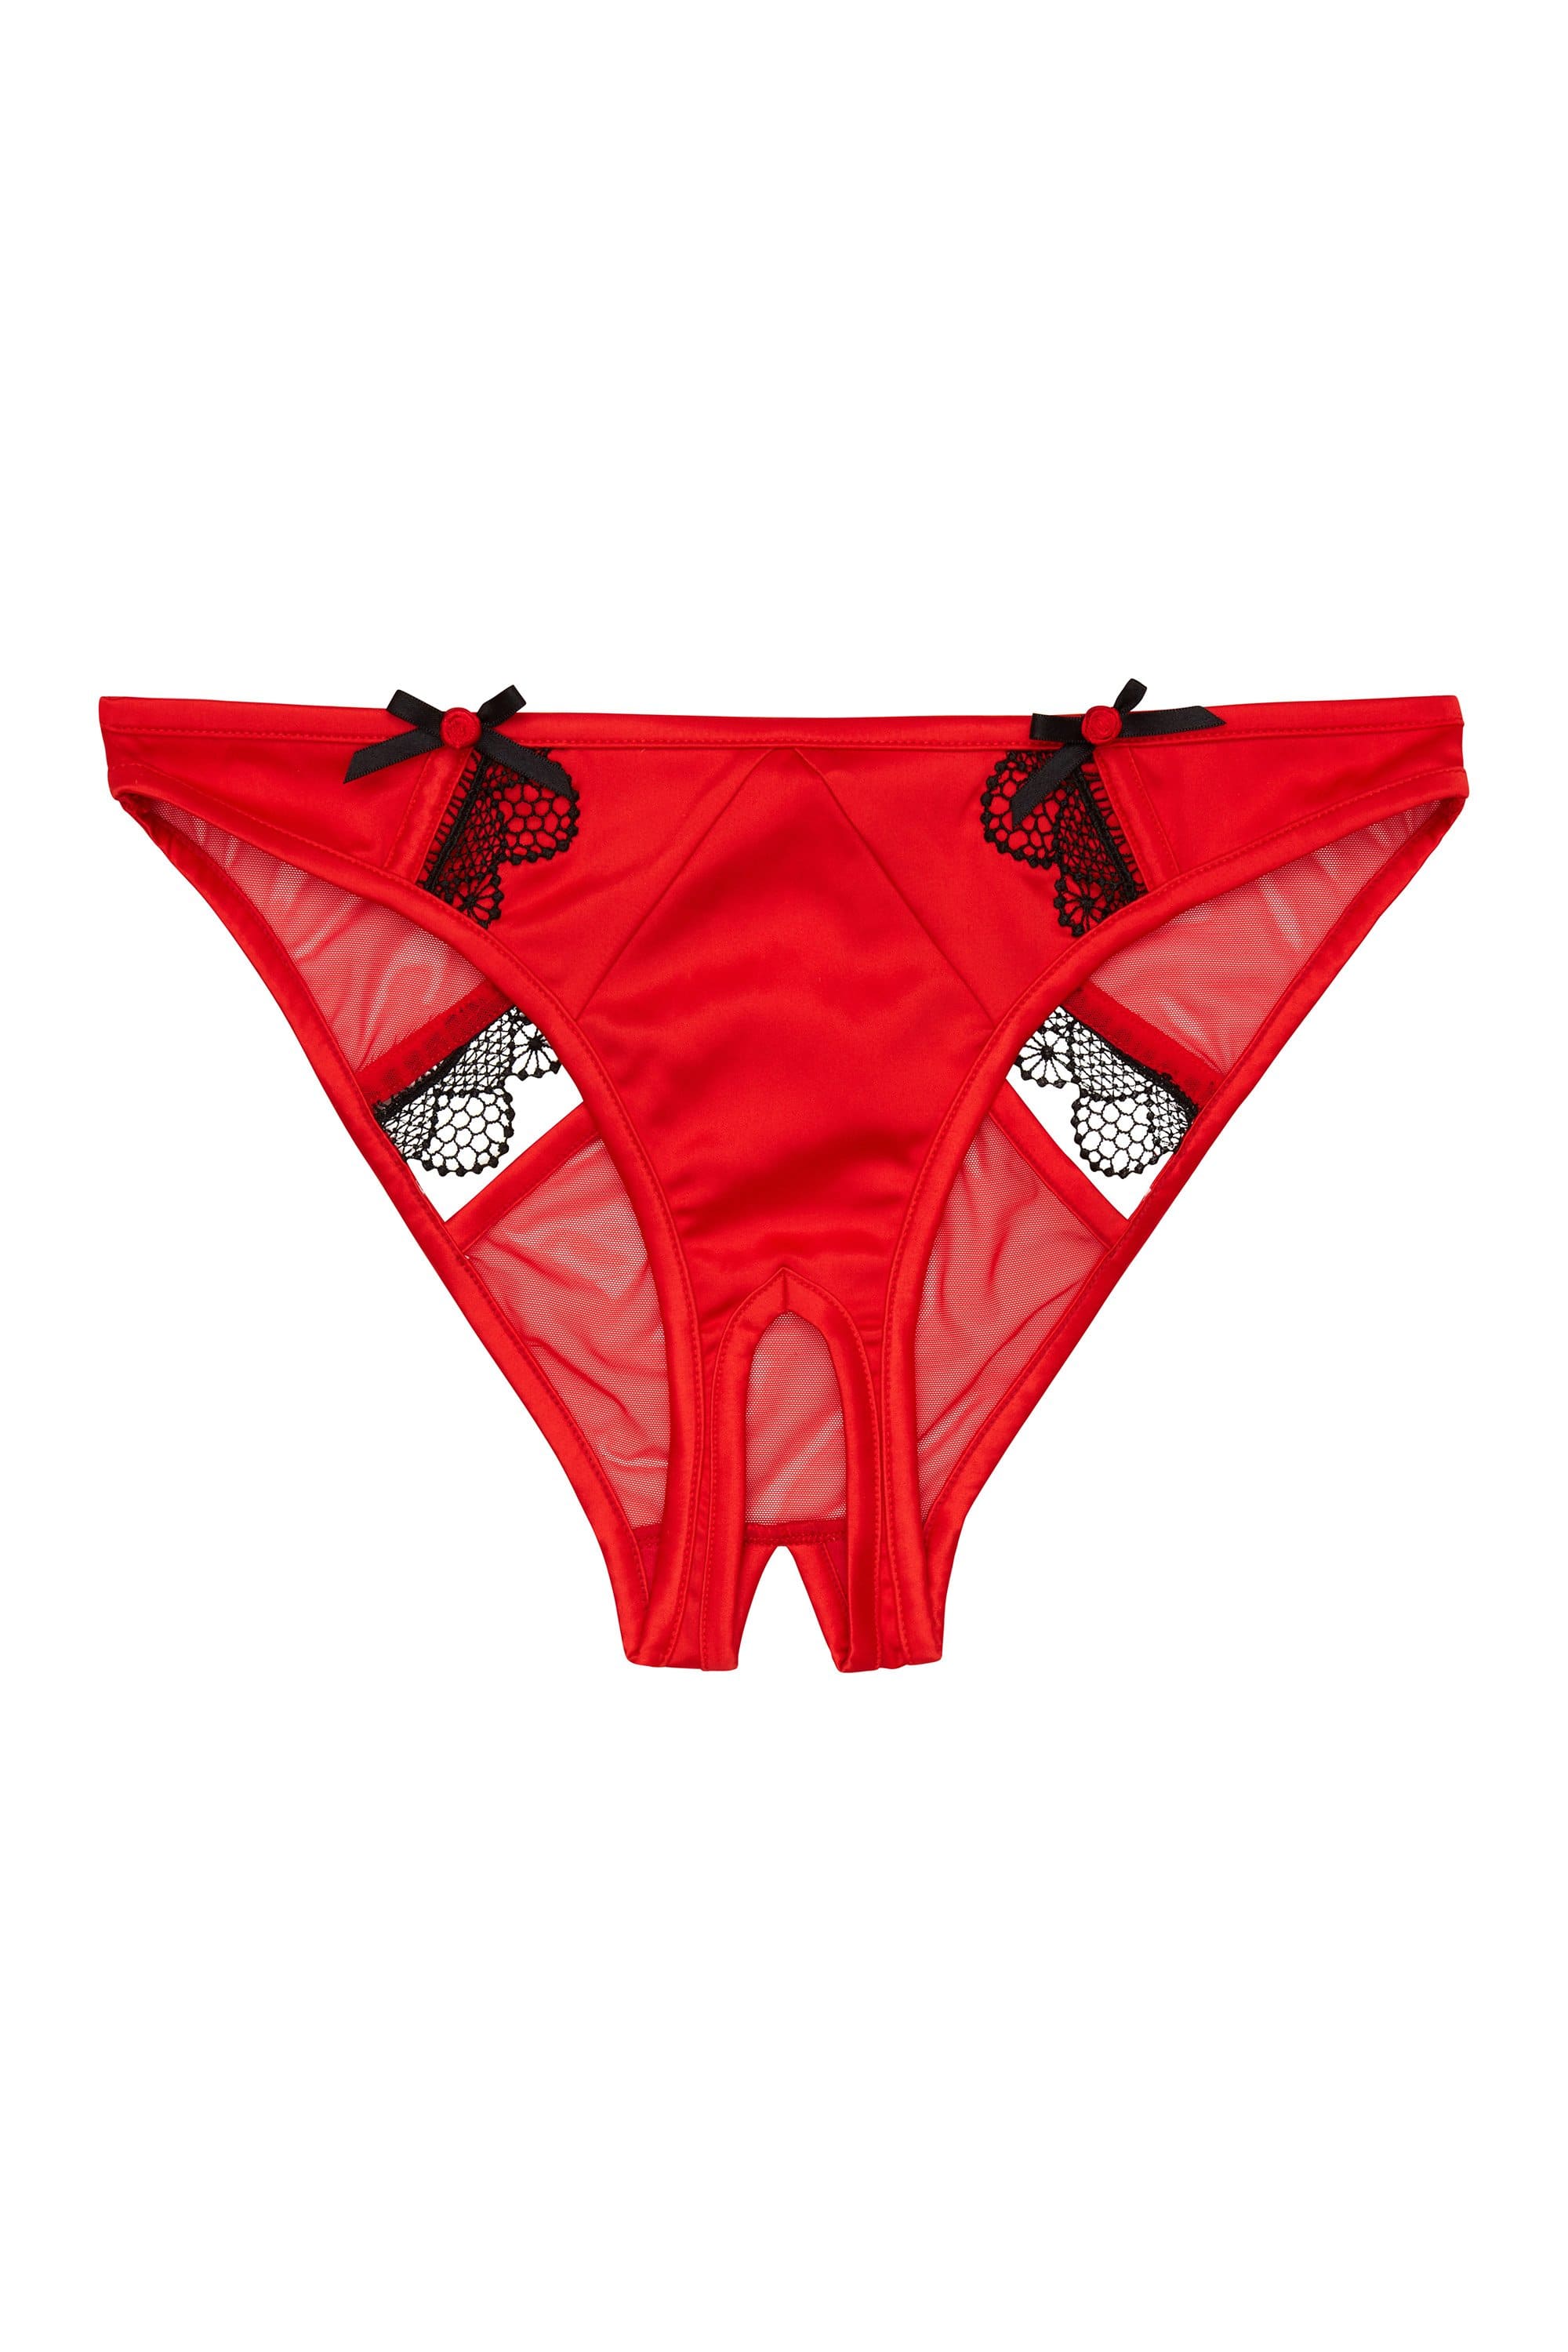 Arlene Curve Red Satin Black Lace Ouvert Brief